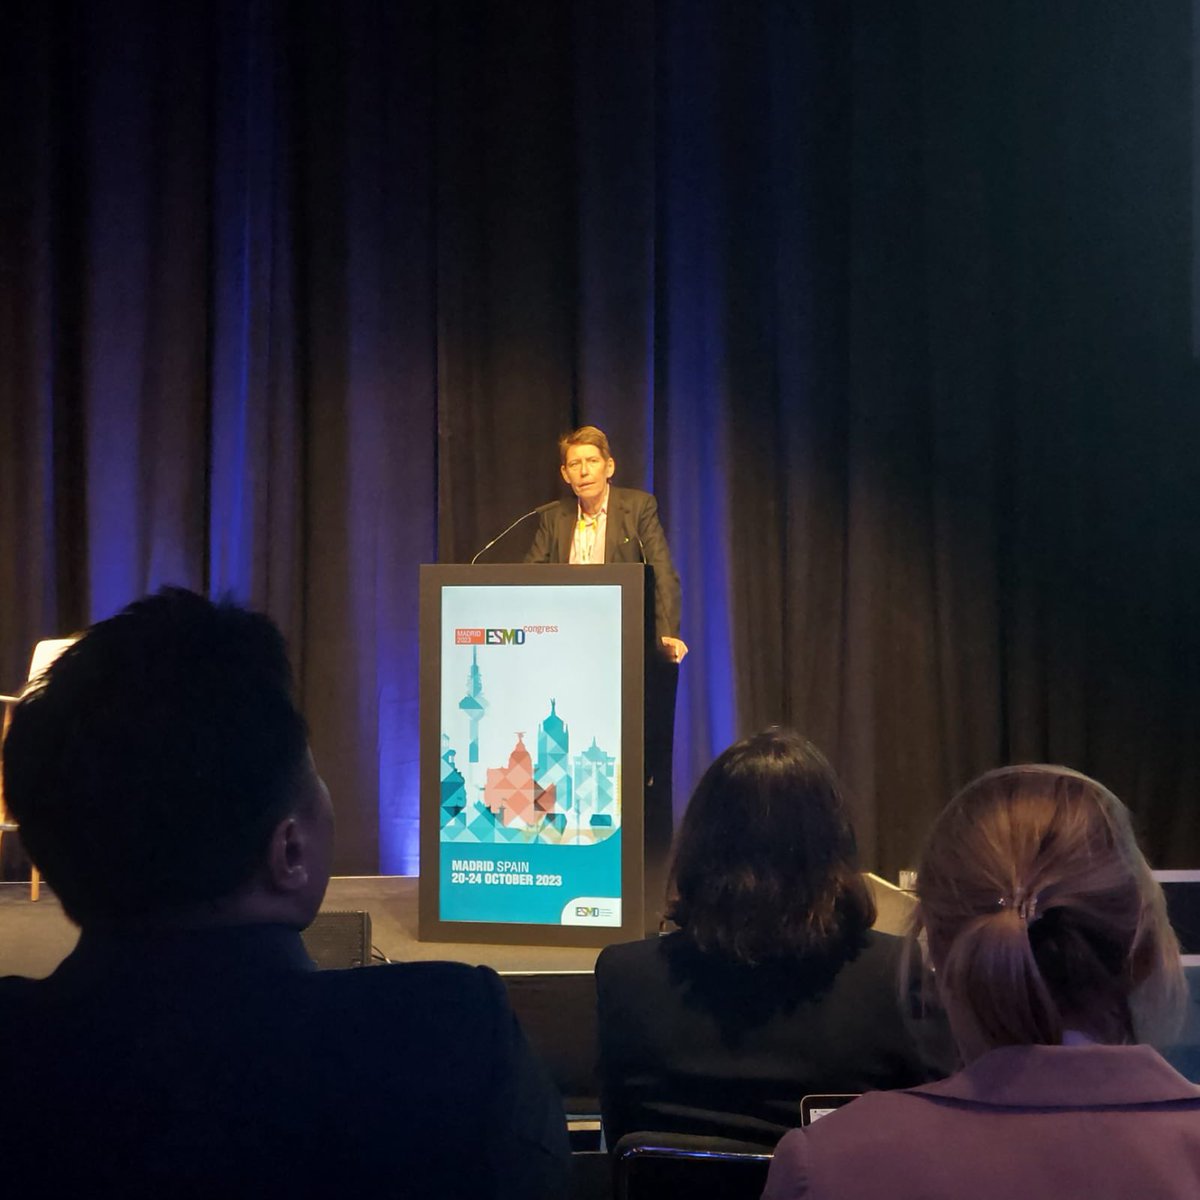 🔶 Beyond study results, @Institut_Curie's physicians also share their expertise through Special Sessions at #ESMO23, as: ➡️ Prof. @AVincentSalomon, discussing #ArtificialIntelligence in cancer prognosis ➡️ Prof. @SBonvalot, about treatment of sarcoma pts w/genetic predisposition